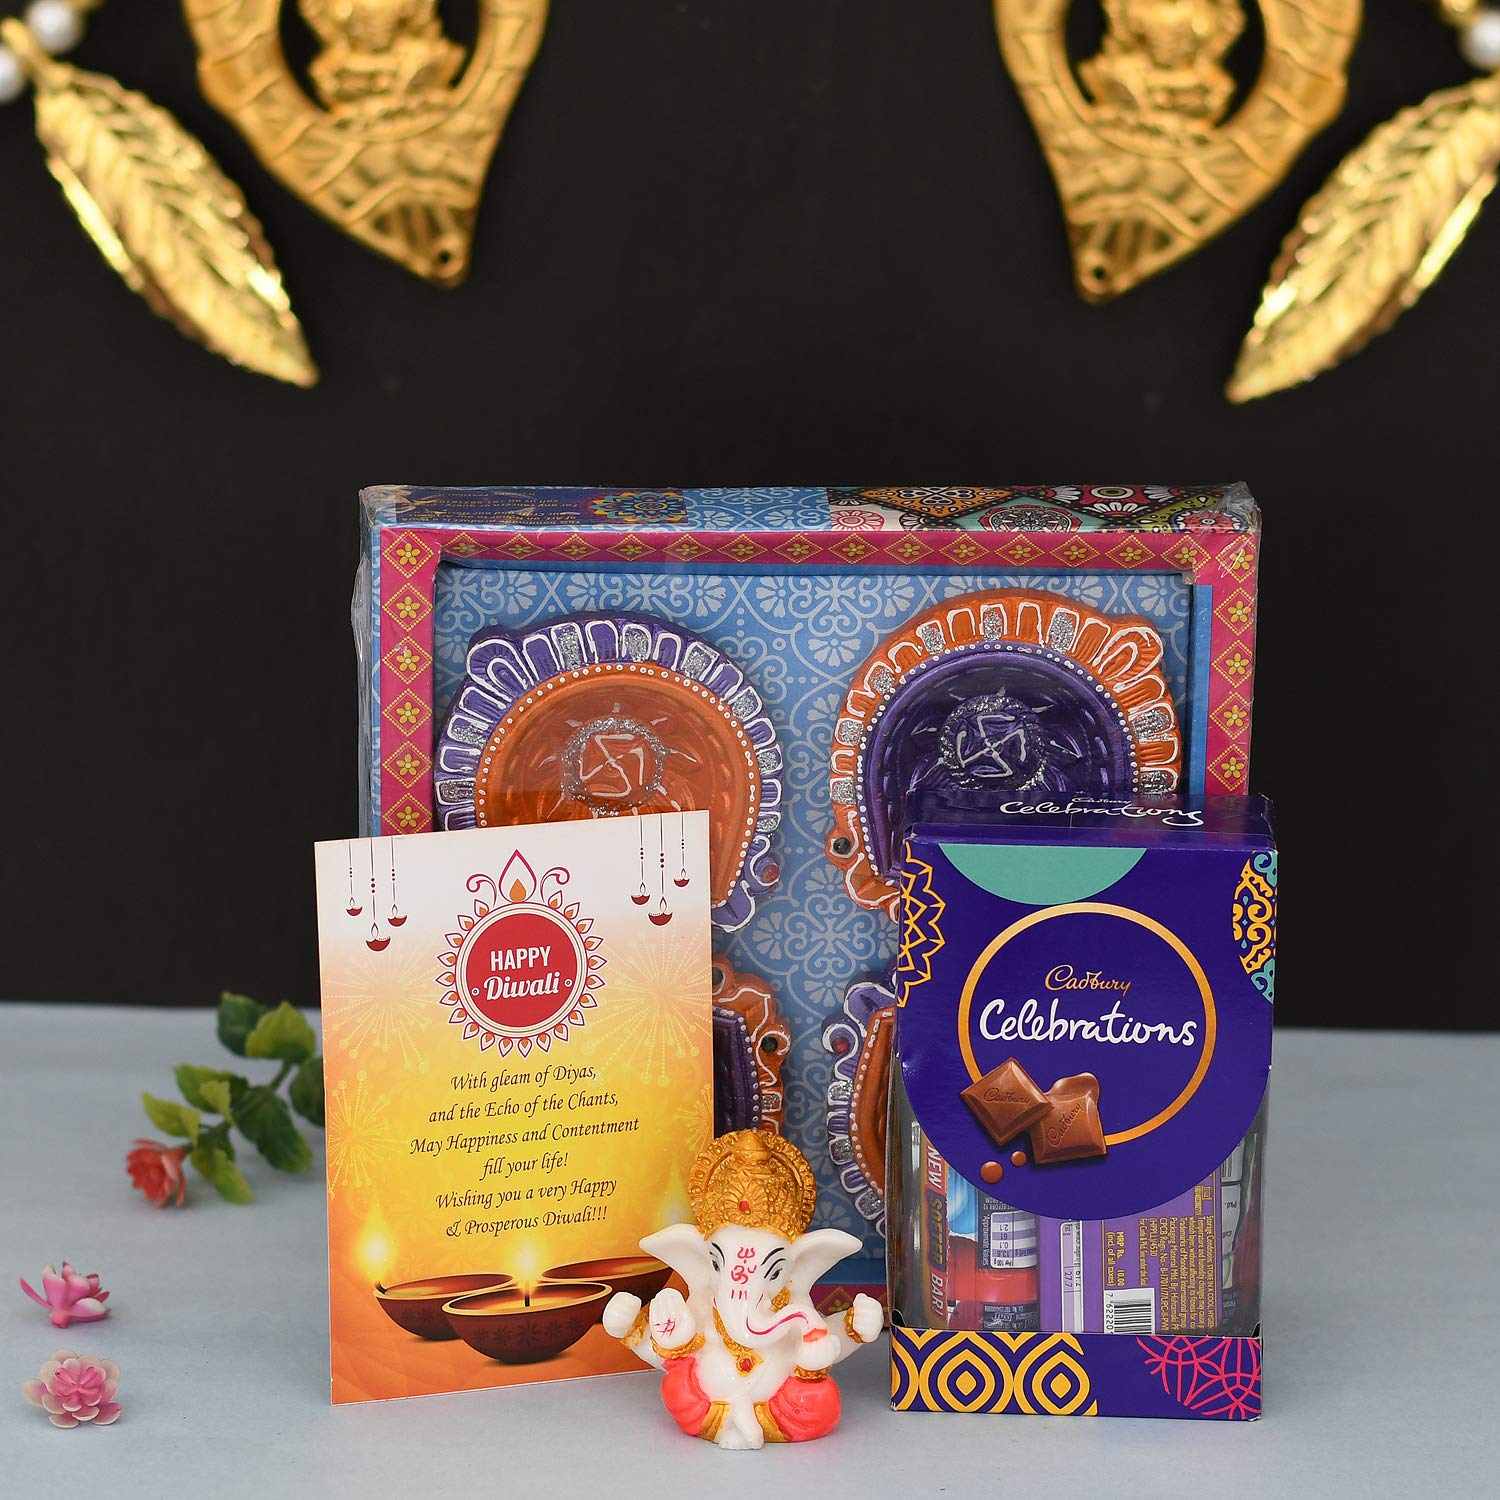 Celebration Gift Pack 500g | Chocolate Covered Cashews (250g) and Almond  (250g) - Shri Ram Creations